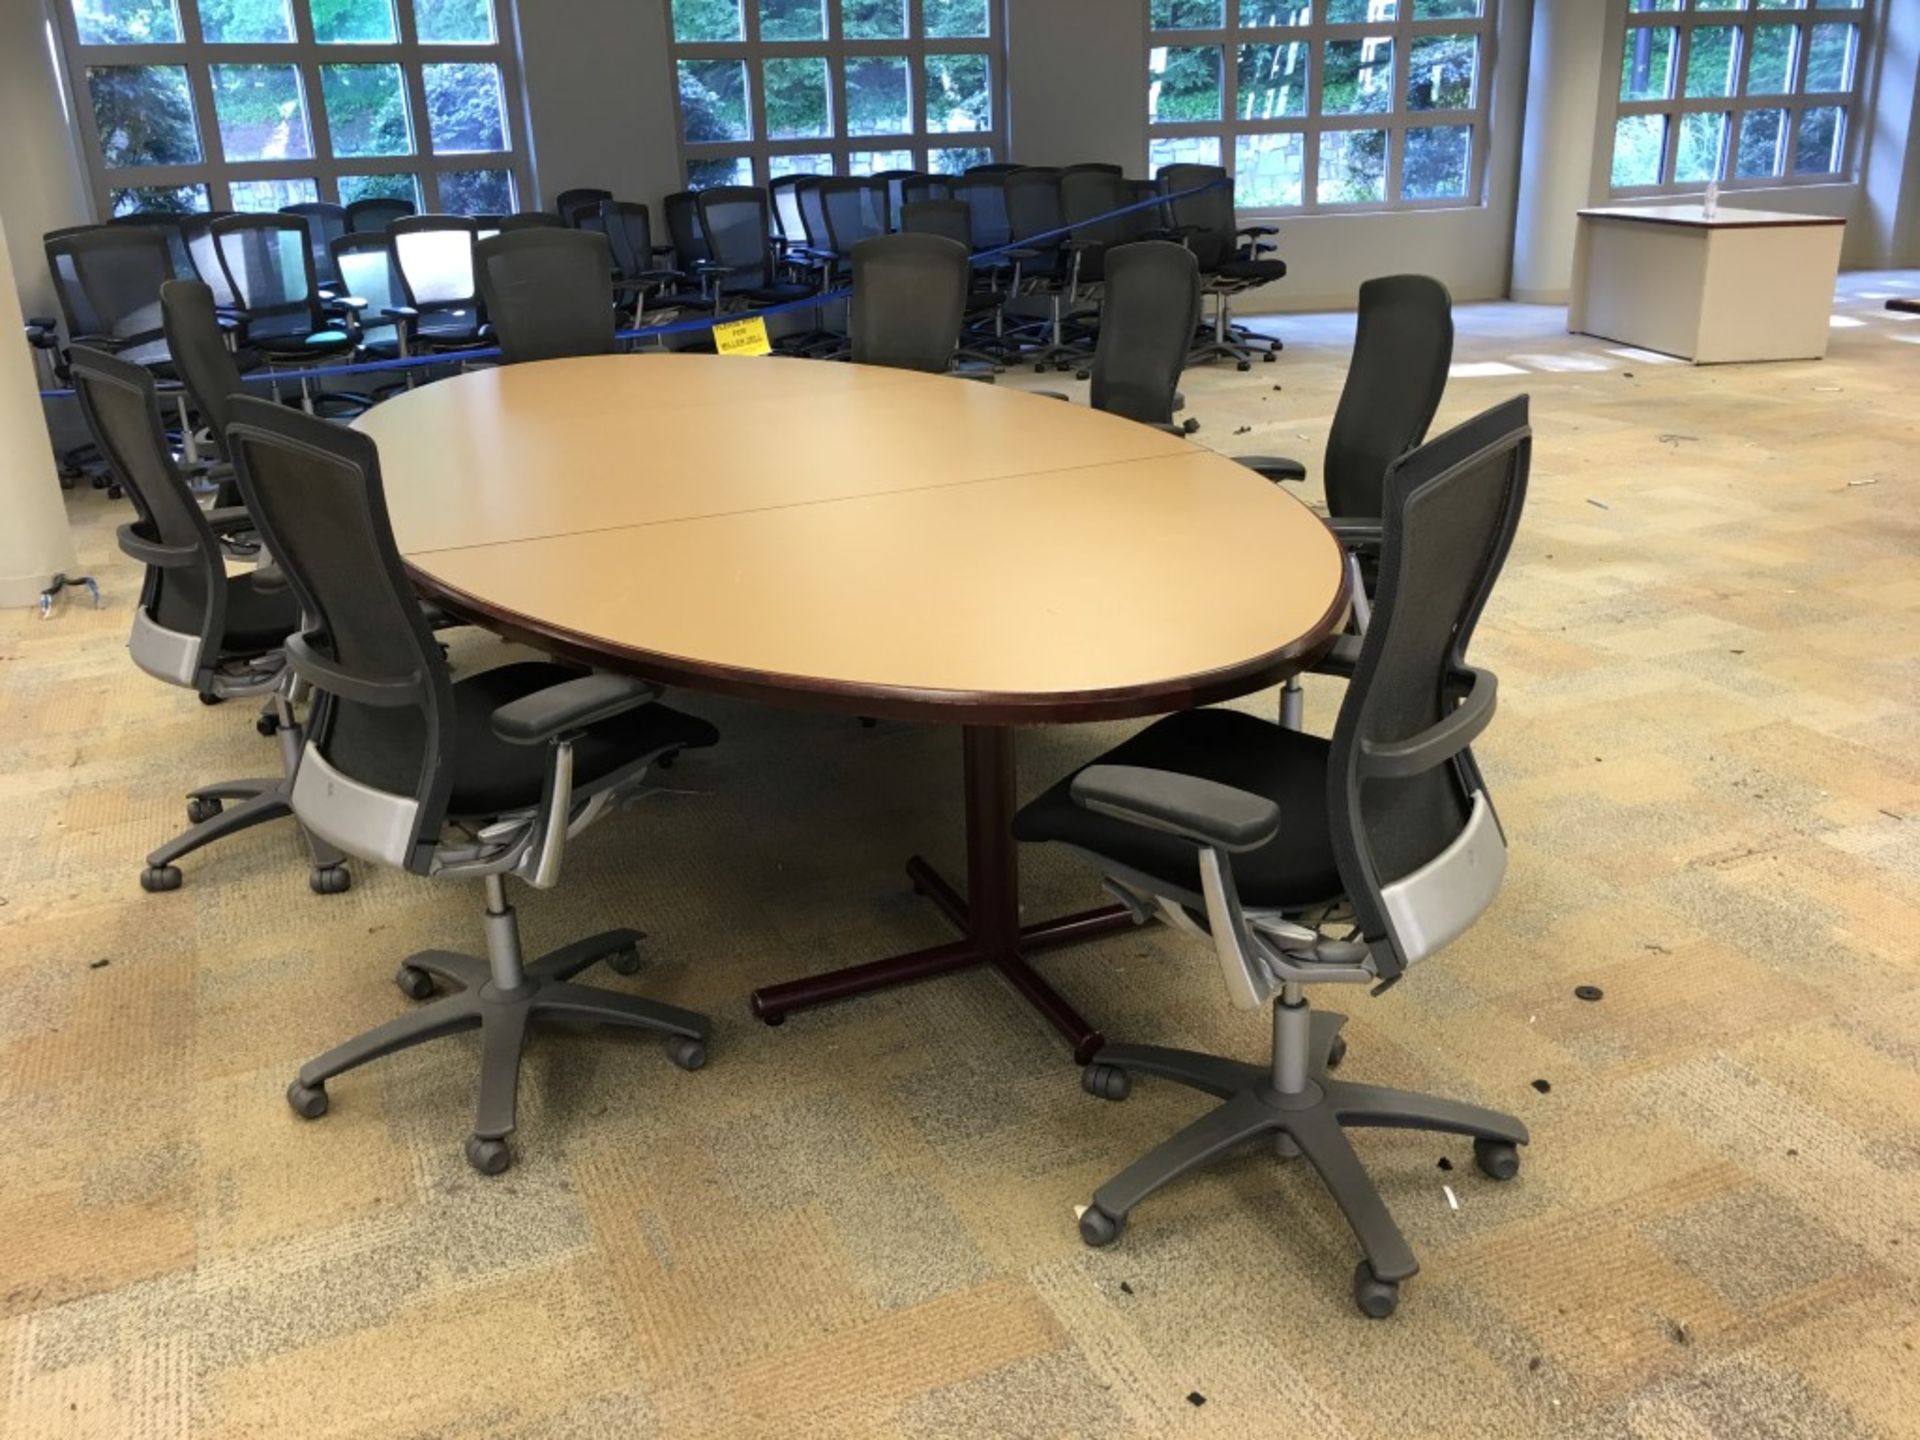 150" X 72" CONFERENCE TABLE WITH 8 PCS OF KNOLL EXECUTIVE CHAIRS